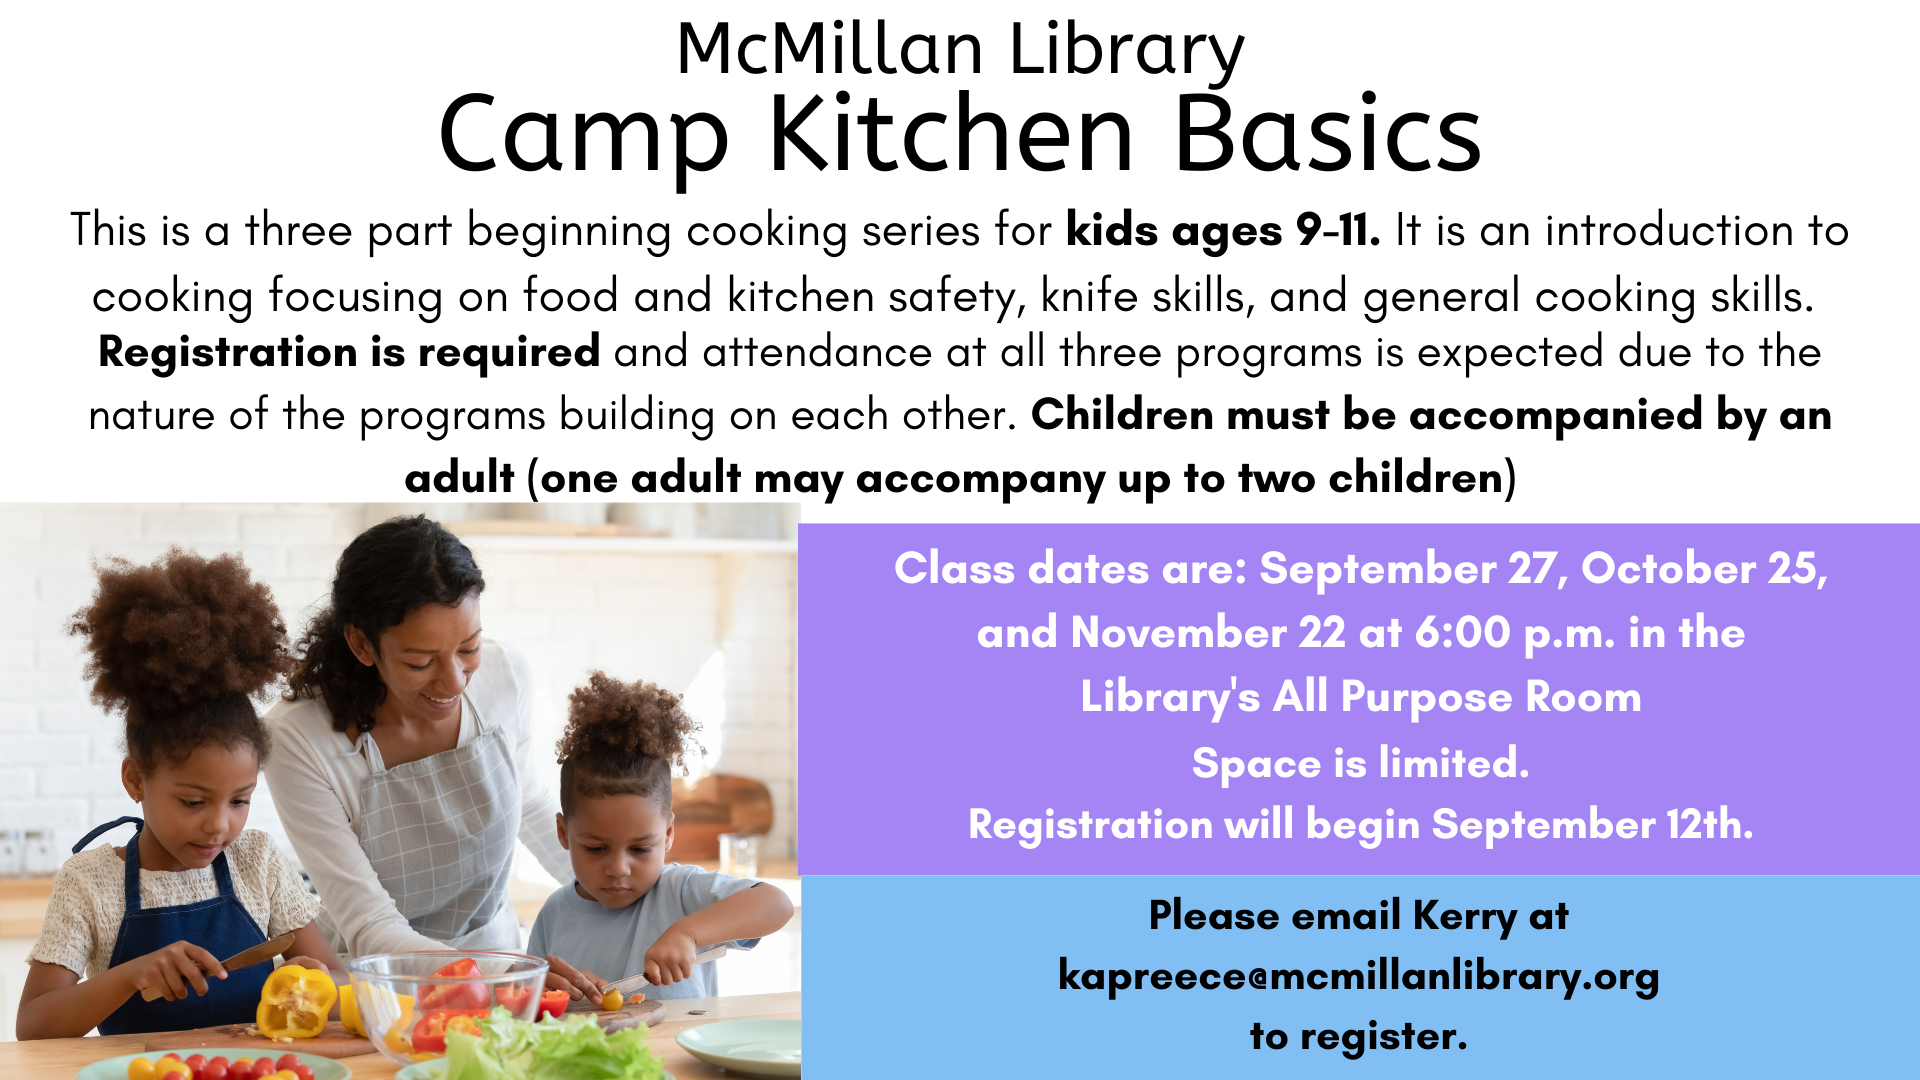 Kids cooking with mom Camp Kitchen Basics